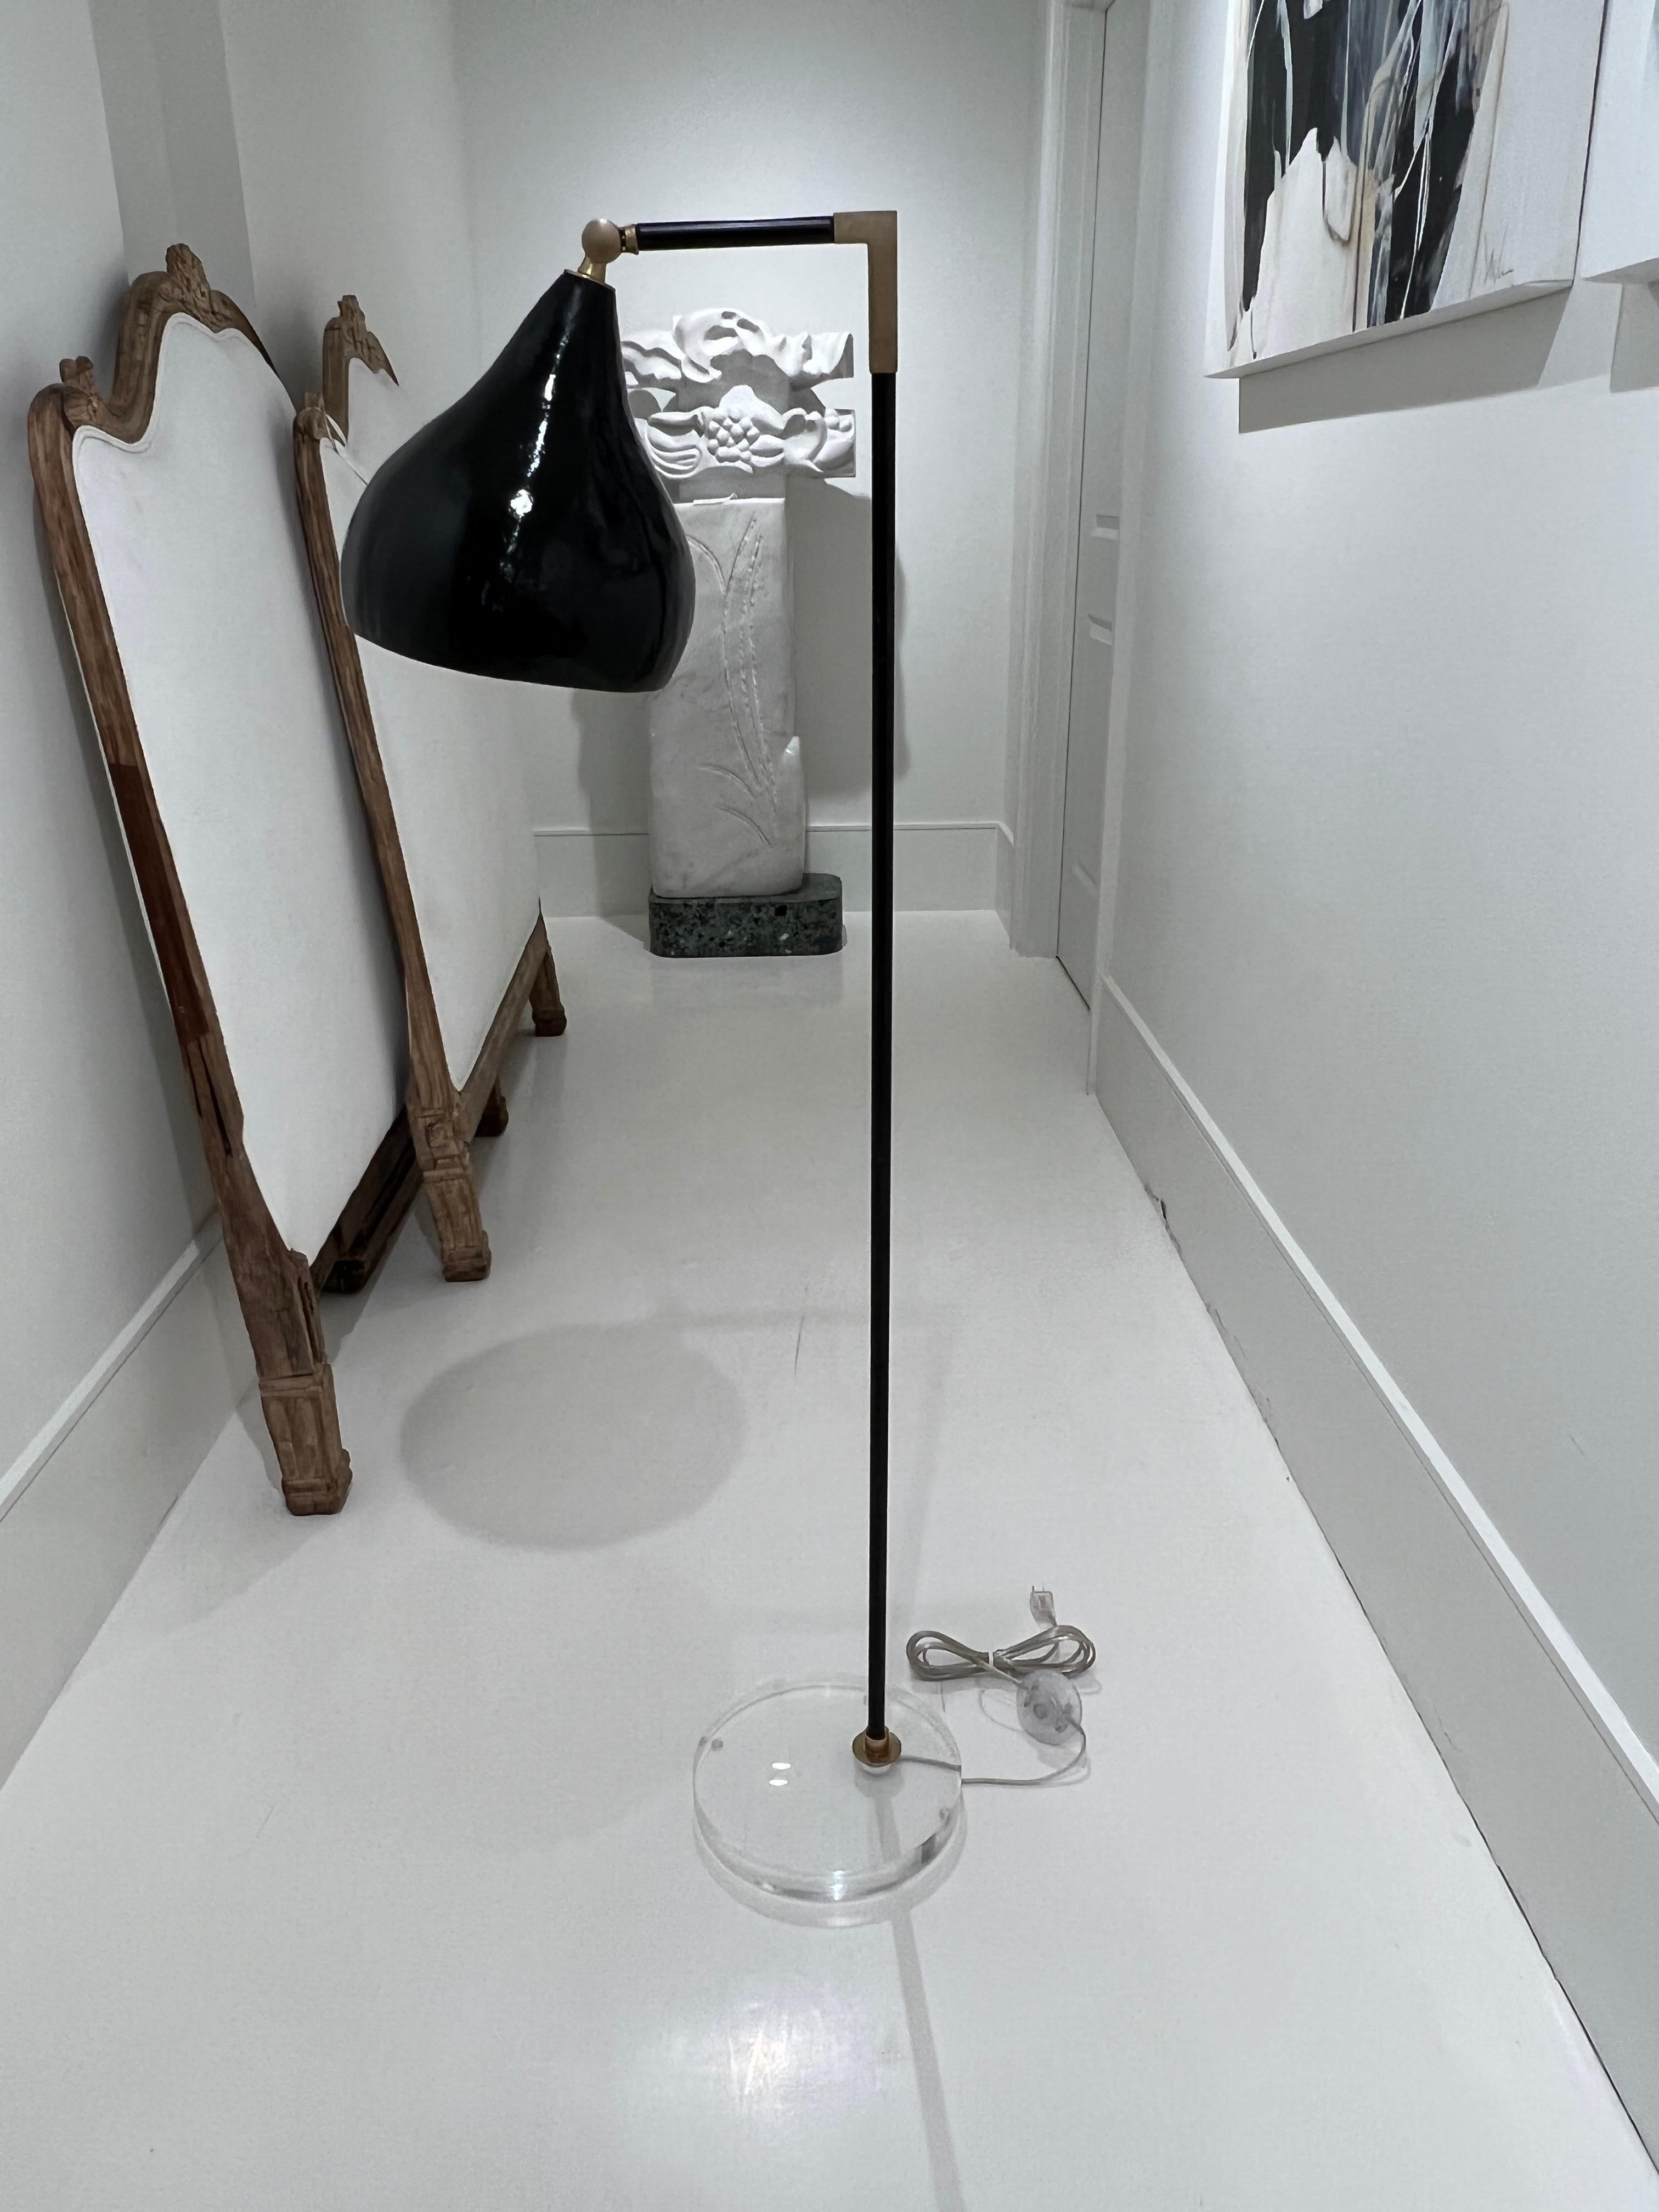 Floor lamp made from a gourd. It is varnished with a high gloss back enamel and electrified. The gourd is mounted on a metal and brass adjustable pole and the base is clear acrylic.